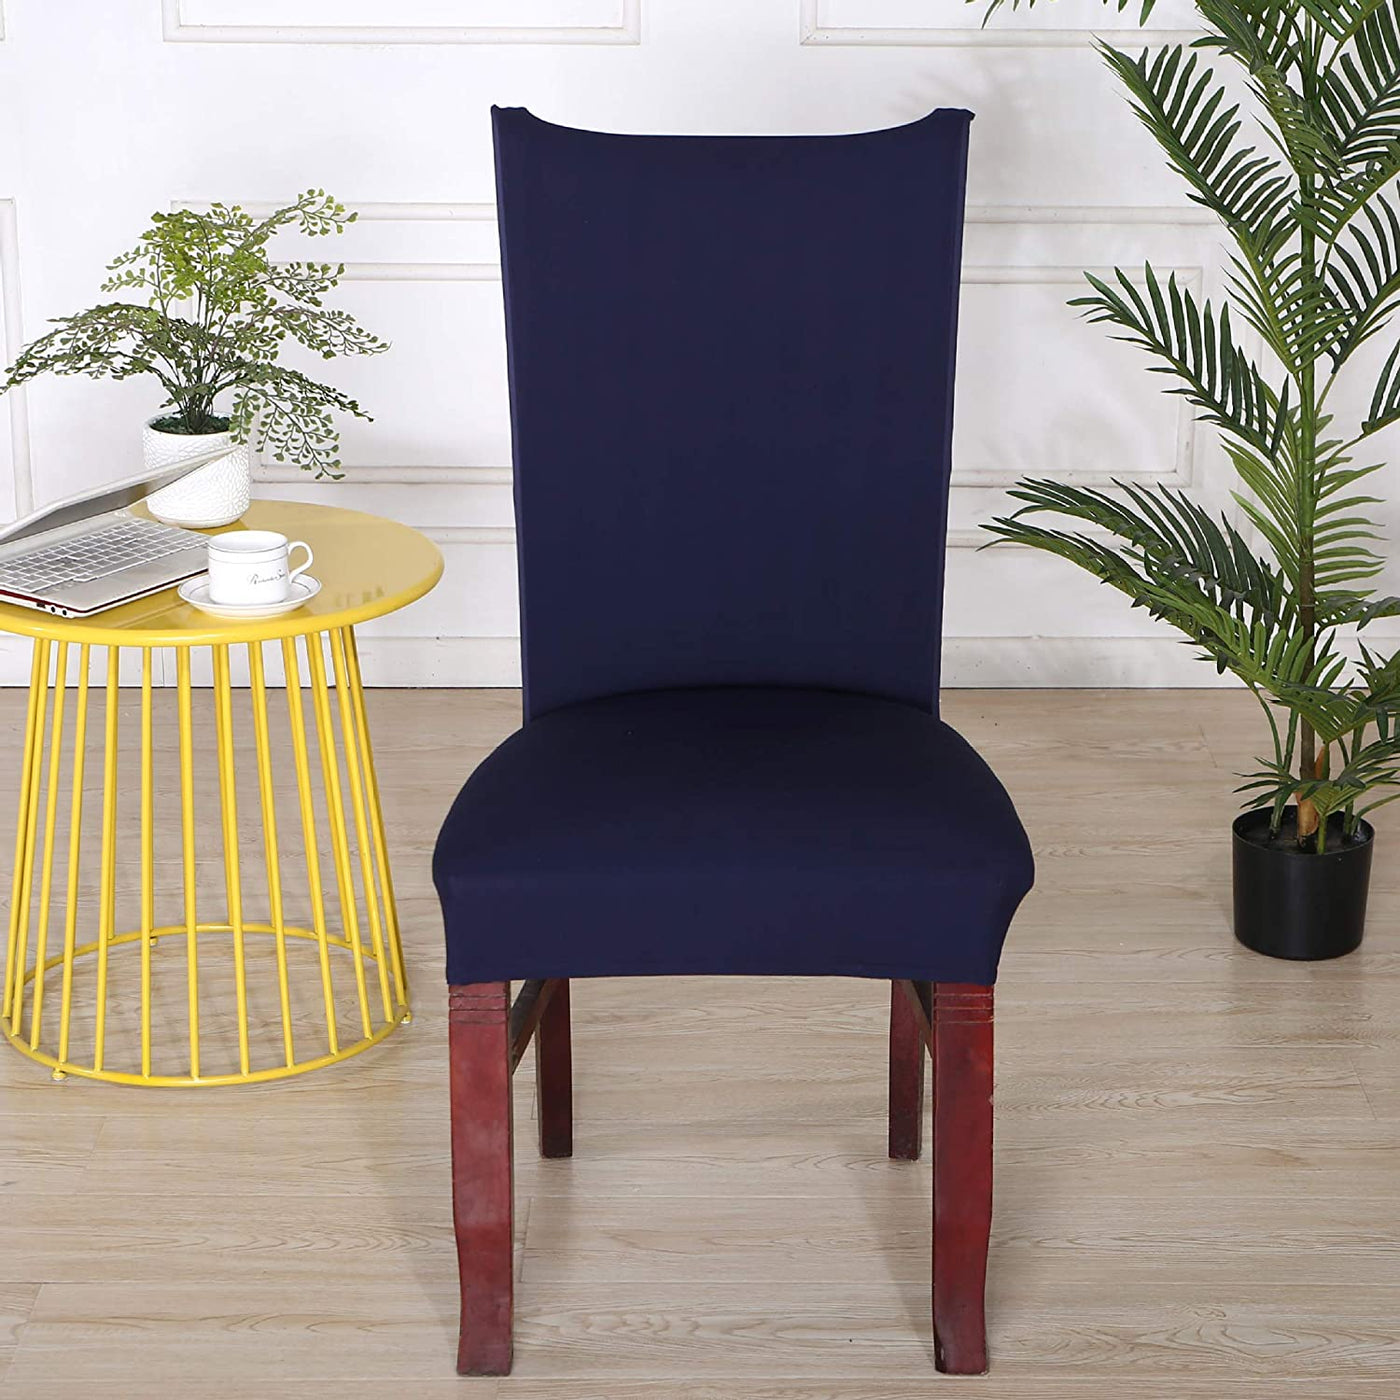 Solid Elastic Chair Cover - Dark Blue